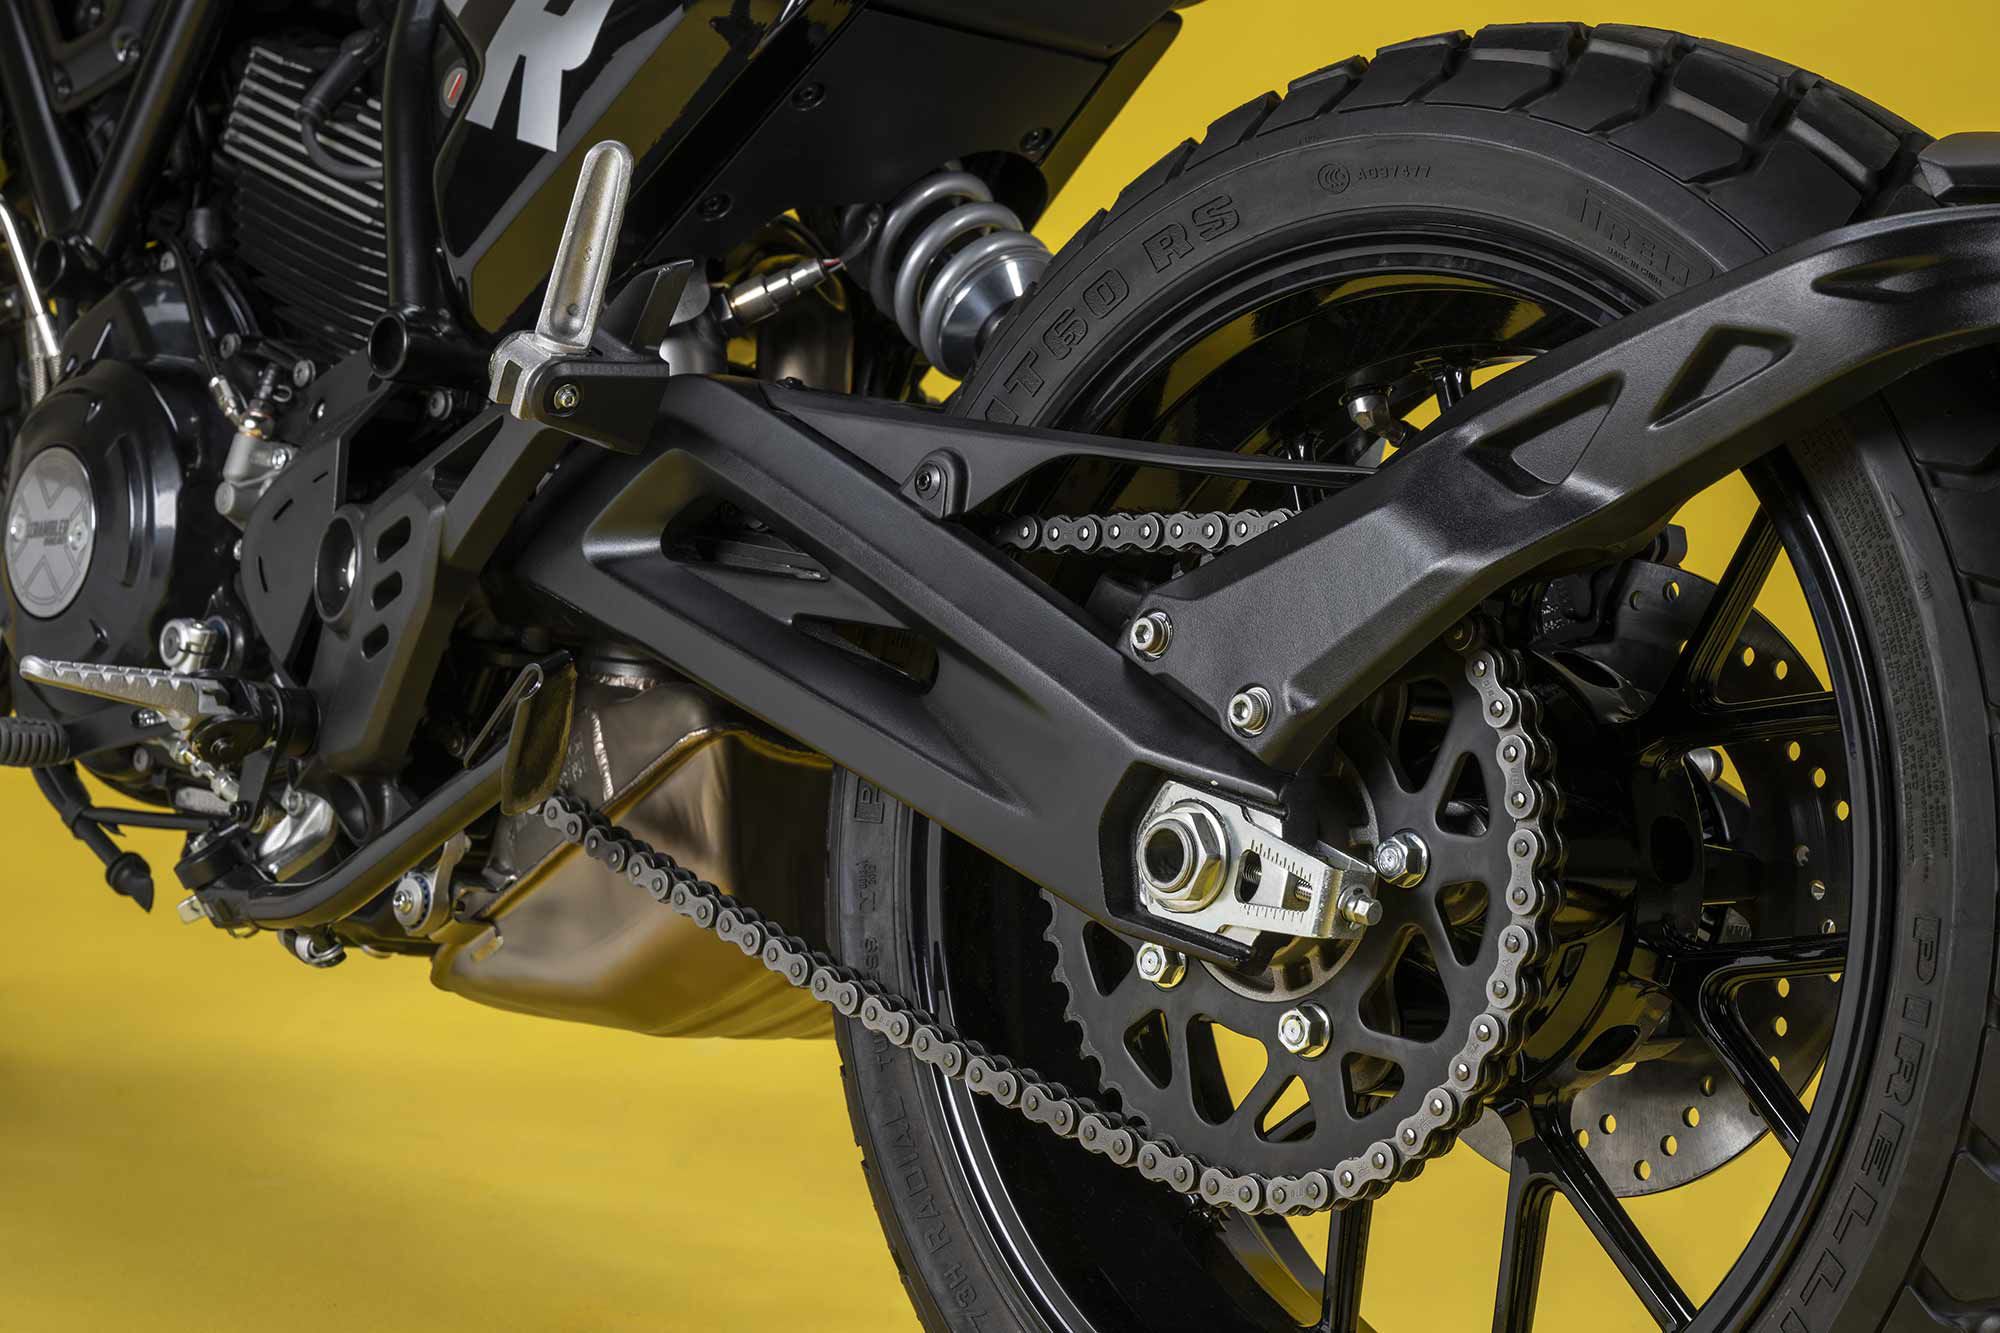 A revised swingarm and trellis frame allowed engineers to centrally position the rear shock.